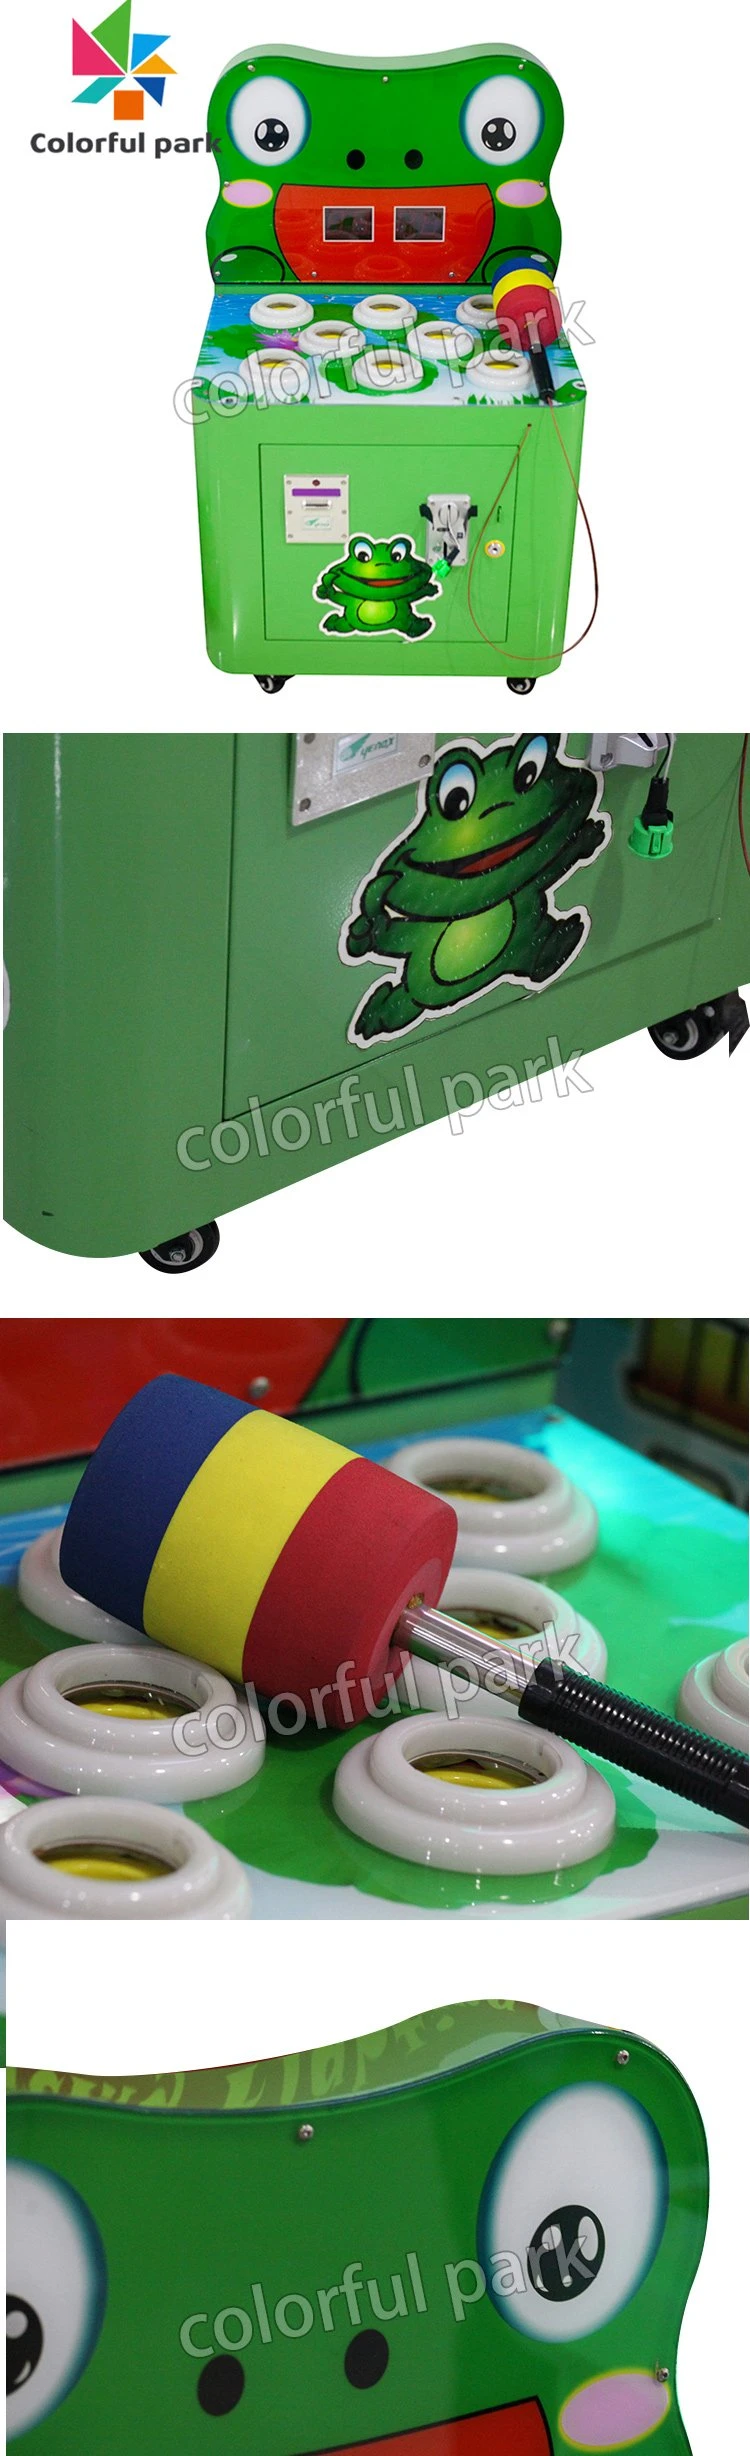 Colorful Park Coin Operated Children Games Whack a Mole Kids Hammer Hit Frog Arcade Game Machine